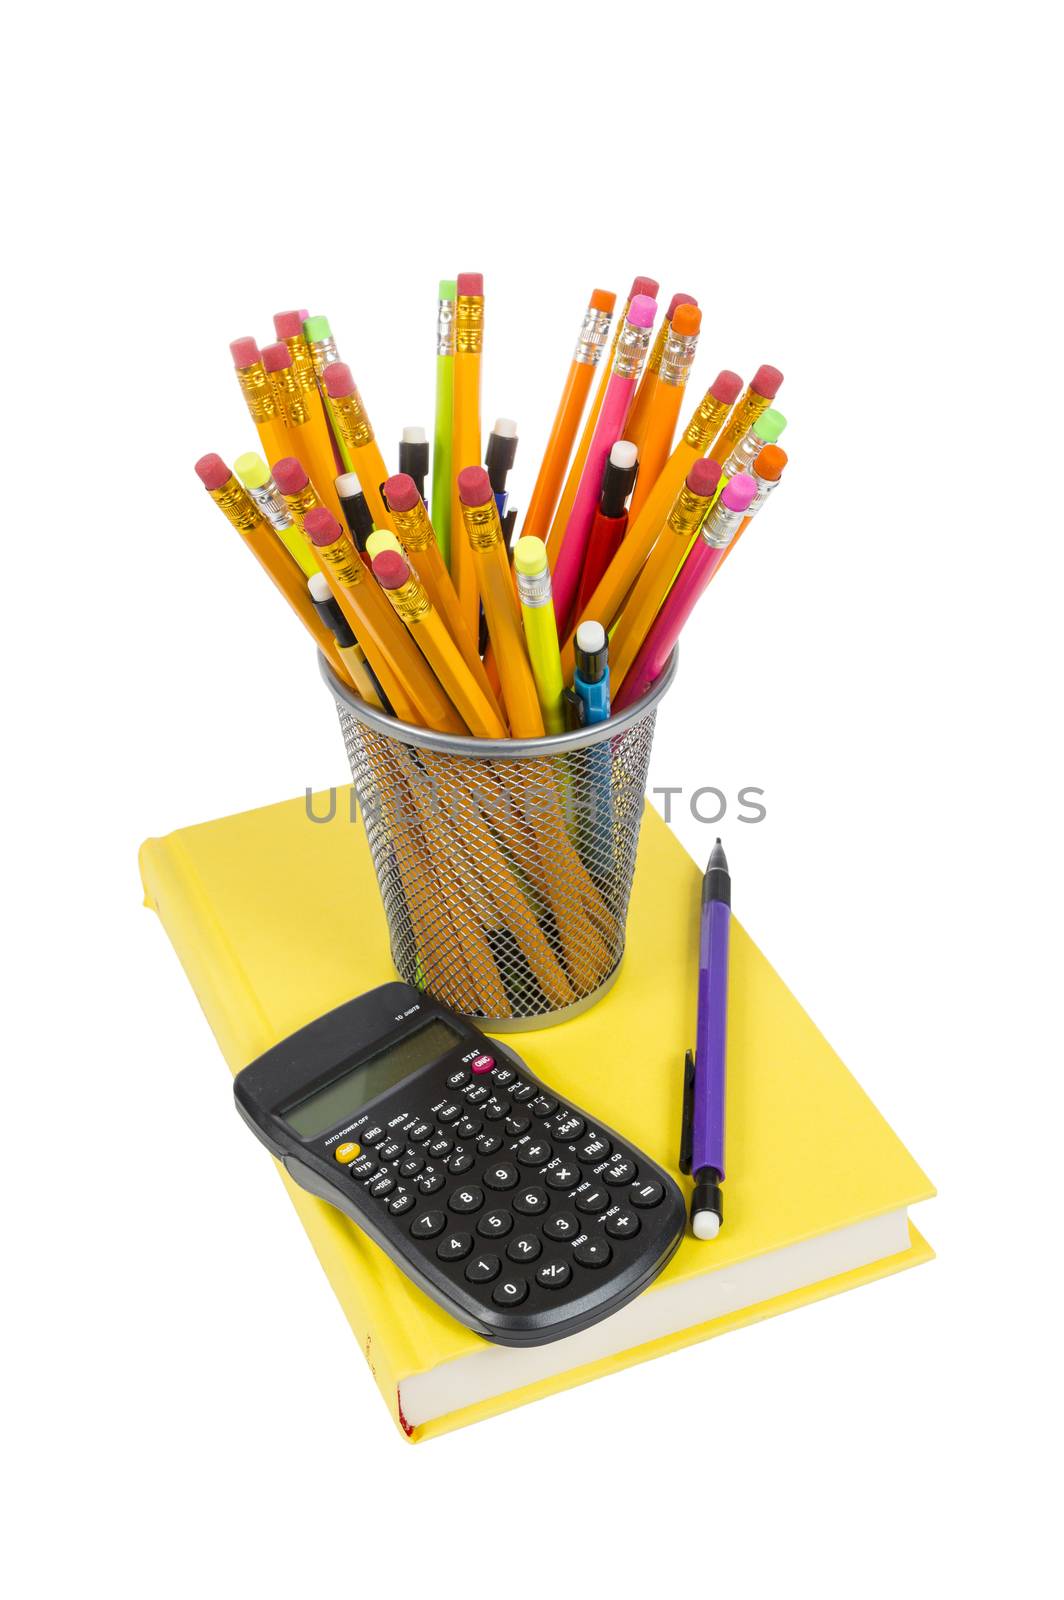 Vertical shot of colorful pencils of different kinds inside a pencil holder and resting on a brightly colored yellow book with calculator on top of book as well. Isolated on white background.